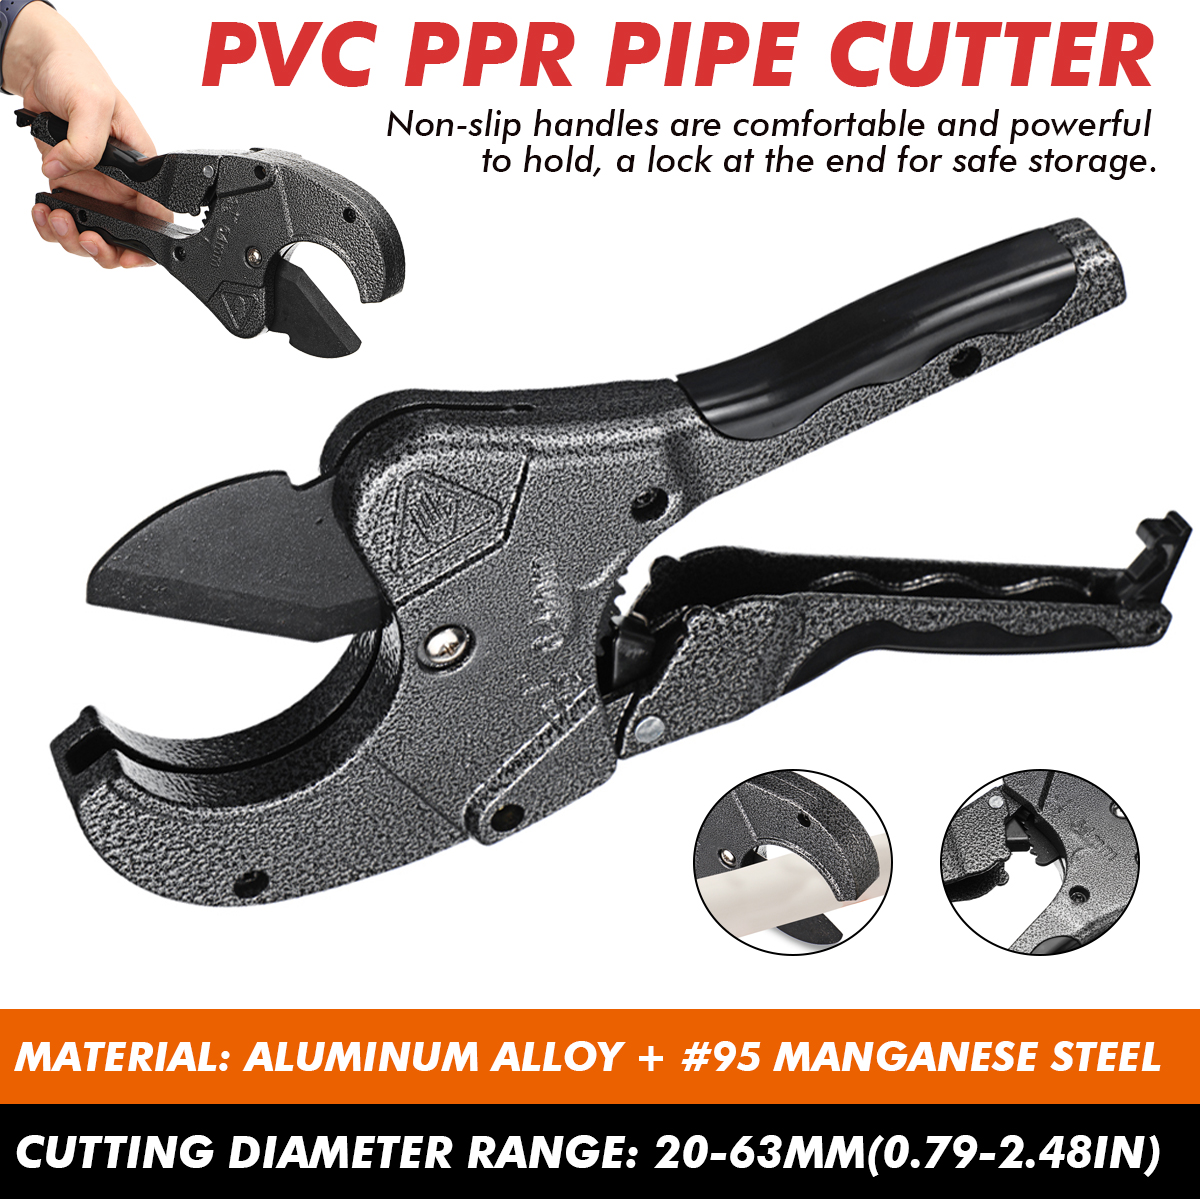 Aluminum-Alloy-Portable-PVC-PPR-Pipe-Cutter-Hose-Ratchet-Action-Up-To-63mm-Tube-1869999-1